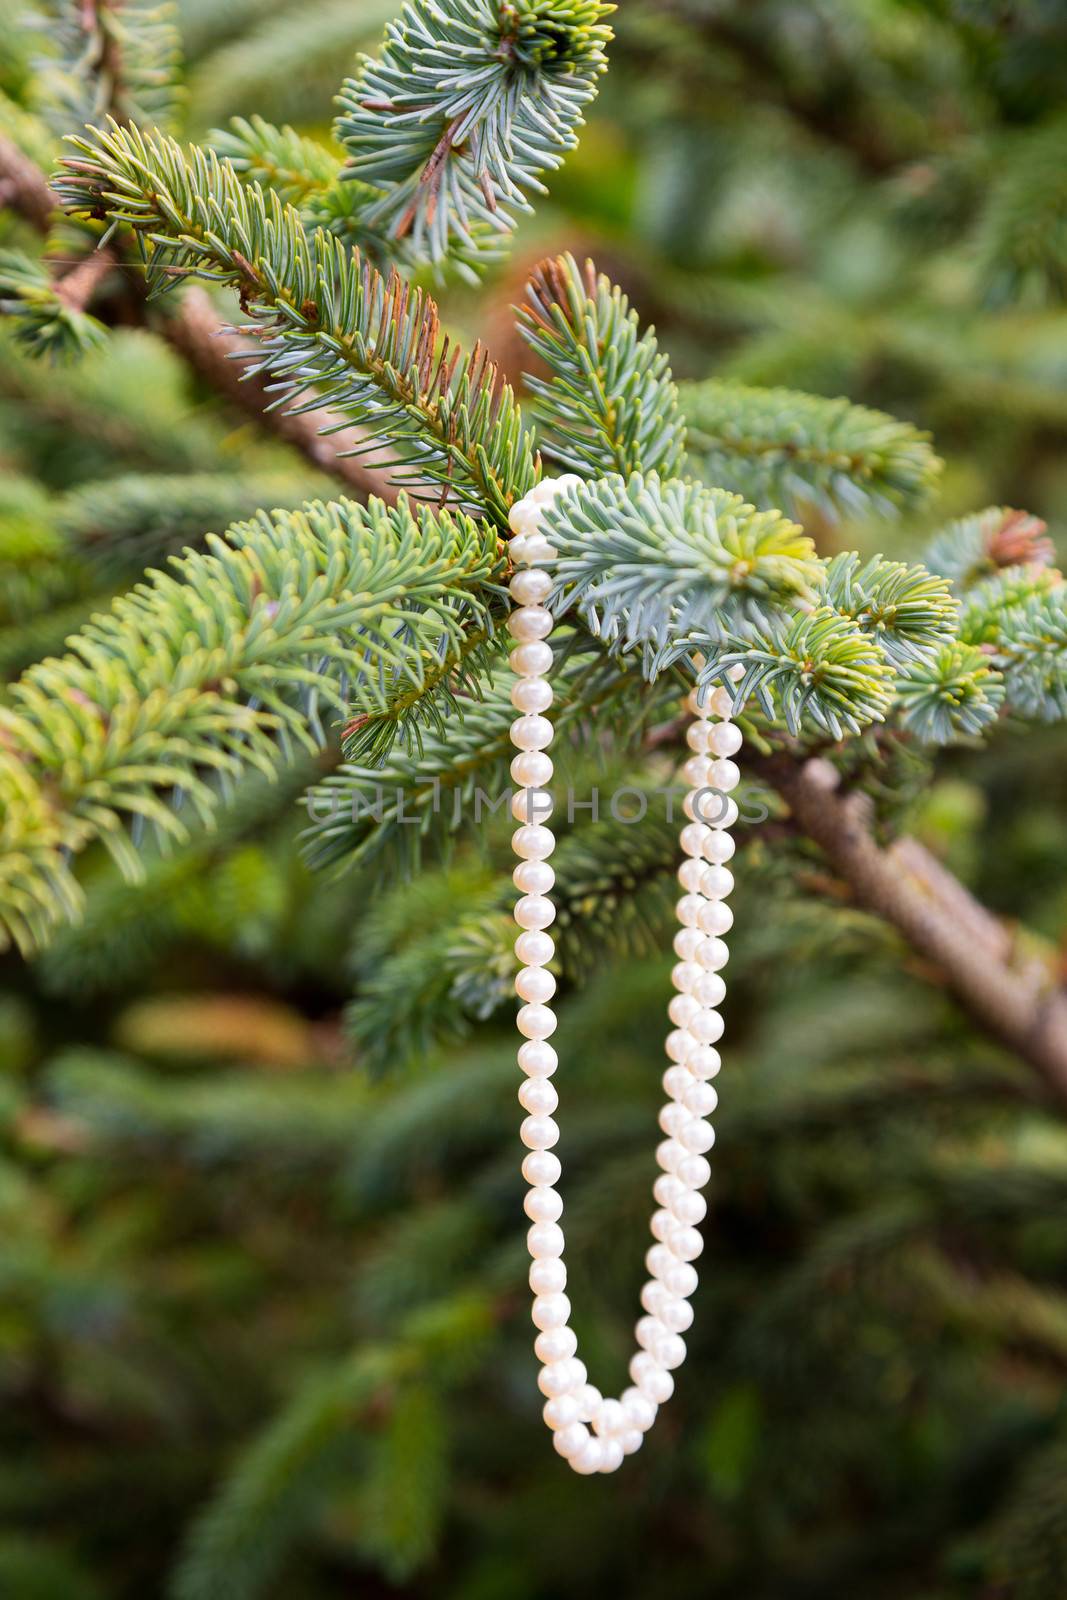 Pearl Necklace in Tree by joshuaraineyphotography